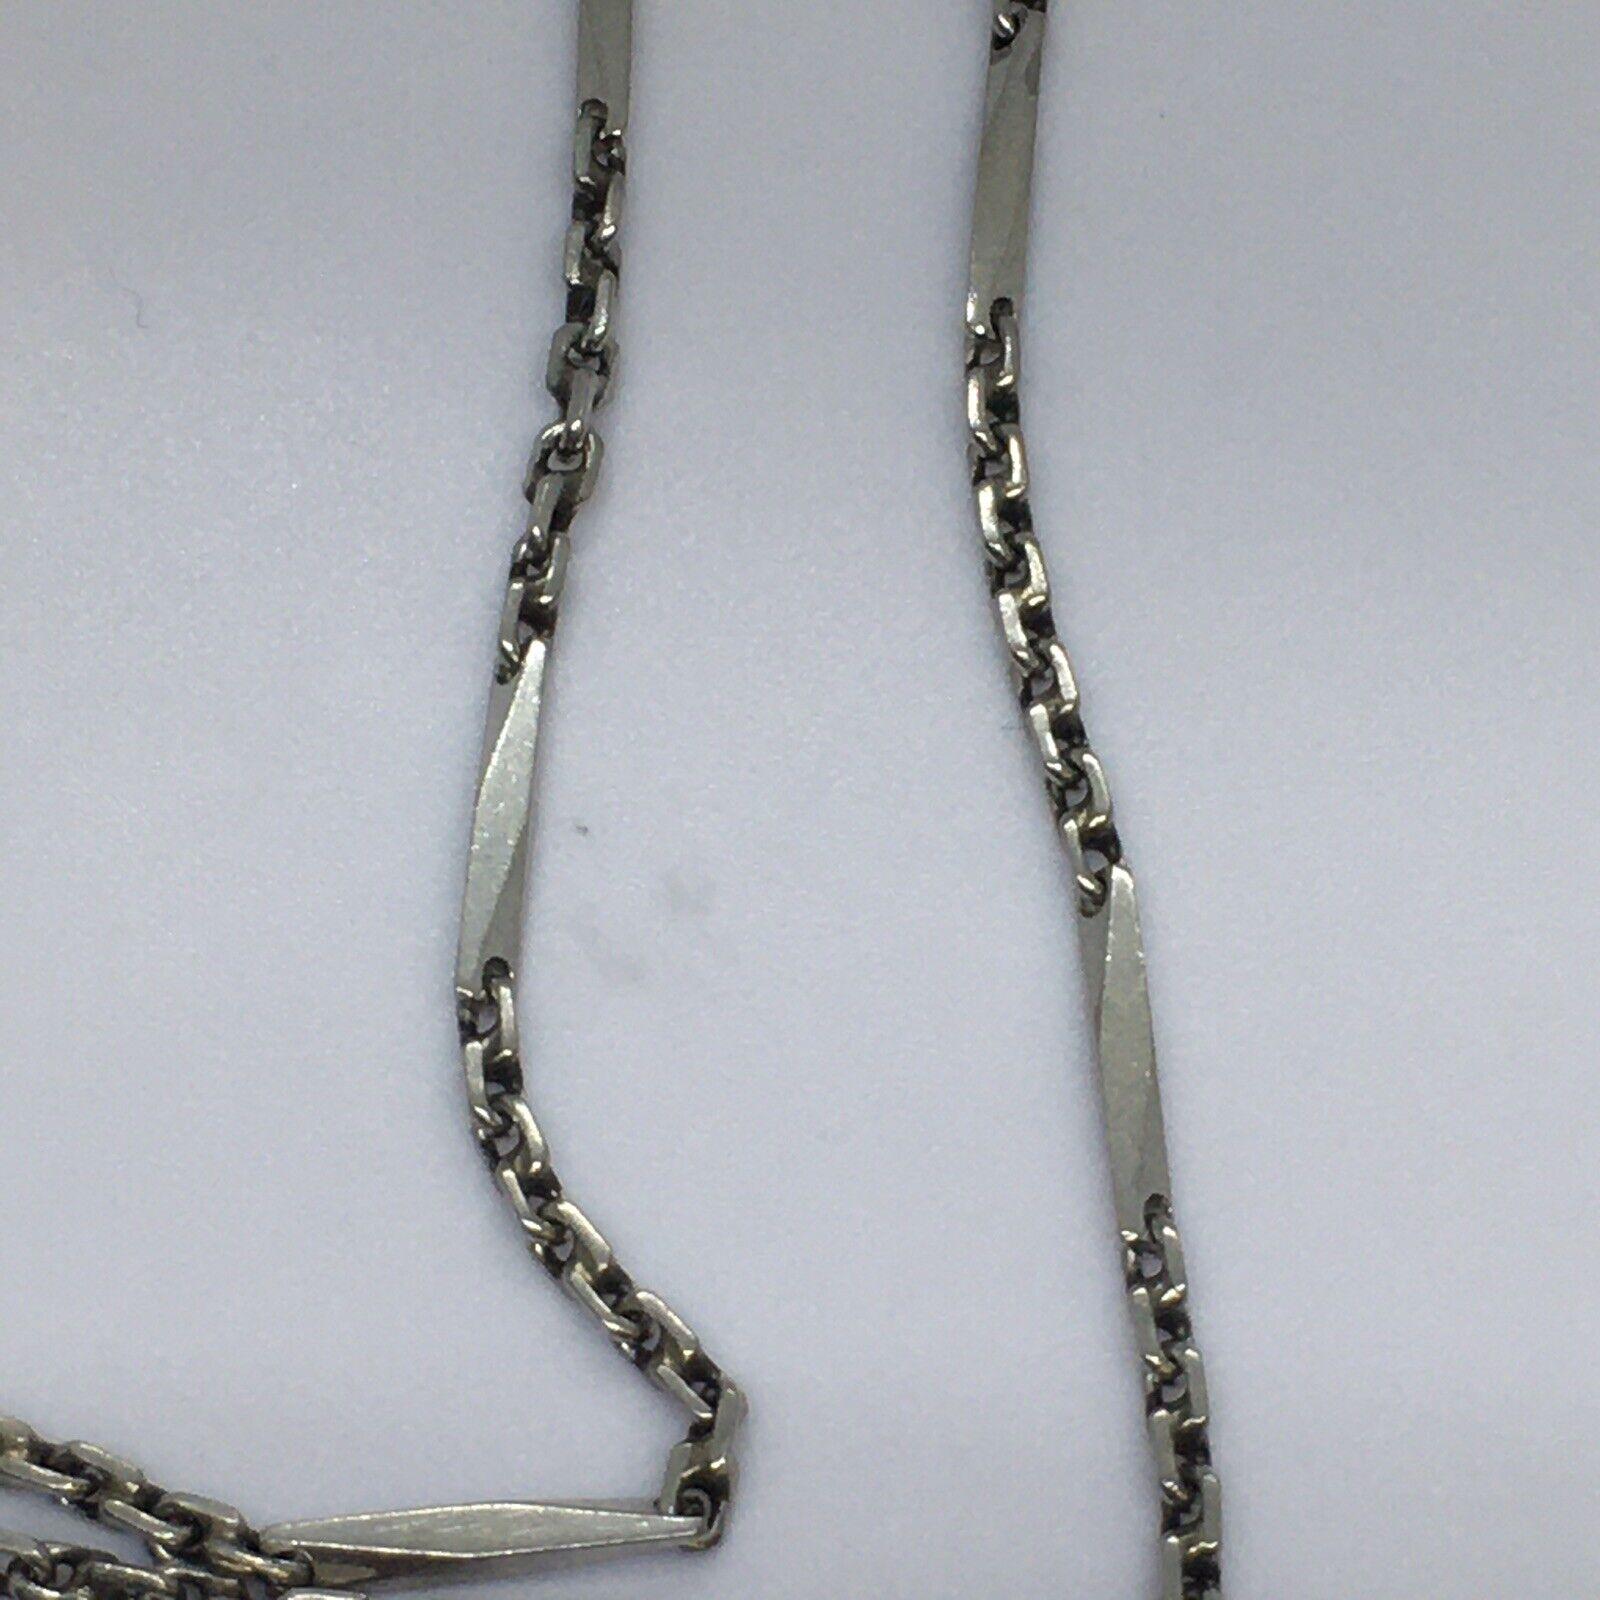 Art Deco Platinum Handmade Necklace Chain possibly Japan 1920s 

Length 21 Inch
Measurements  Longer links 13mm  by 2mm thick, Smaller 3 mm round 
Metal Platinum, tested at 90% 
Weight 18.8 Gram 
Condition Gently used, No sign of repairs, see